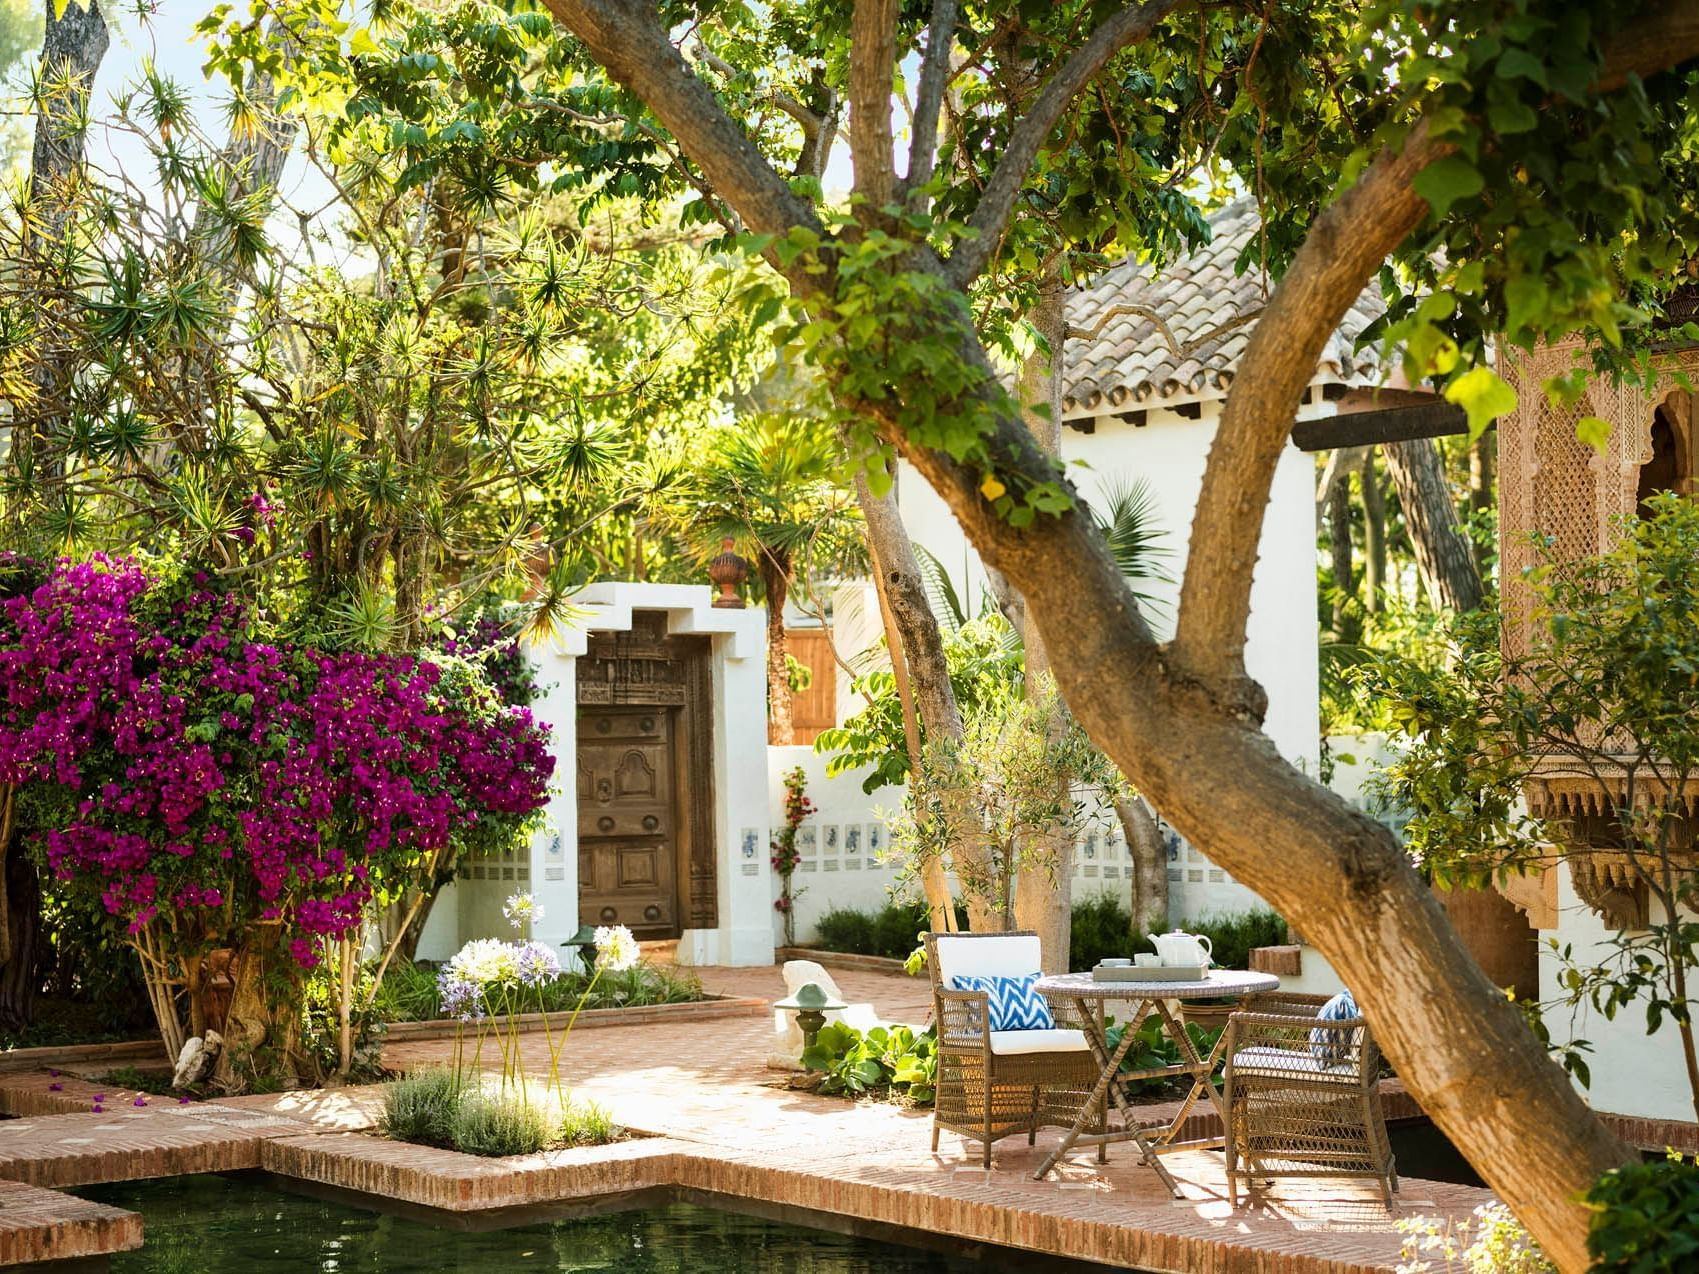 Exterior Hangout Area Surrounded by Trees and Flowers -  Farah Casablanca Hotel